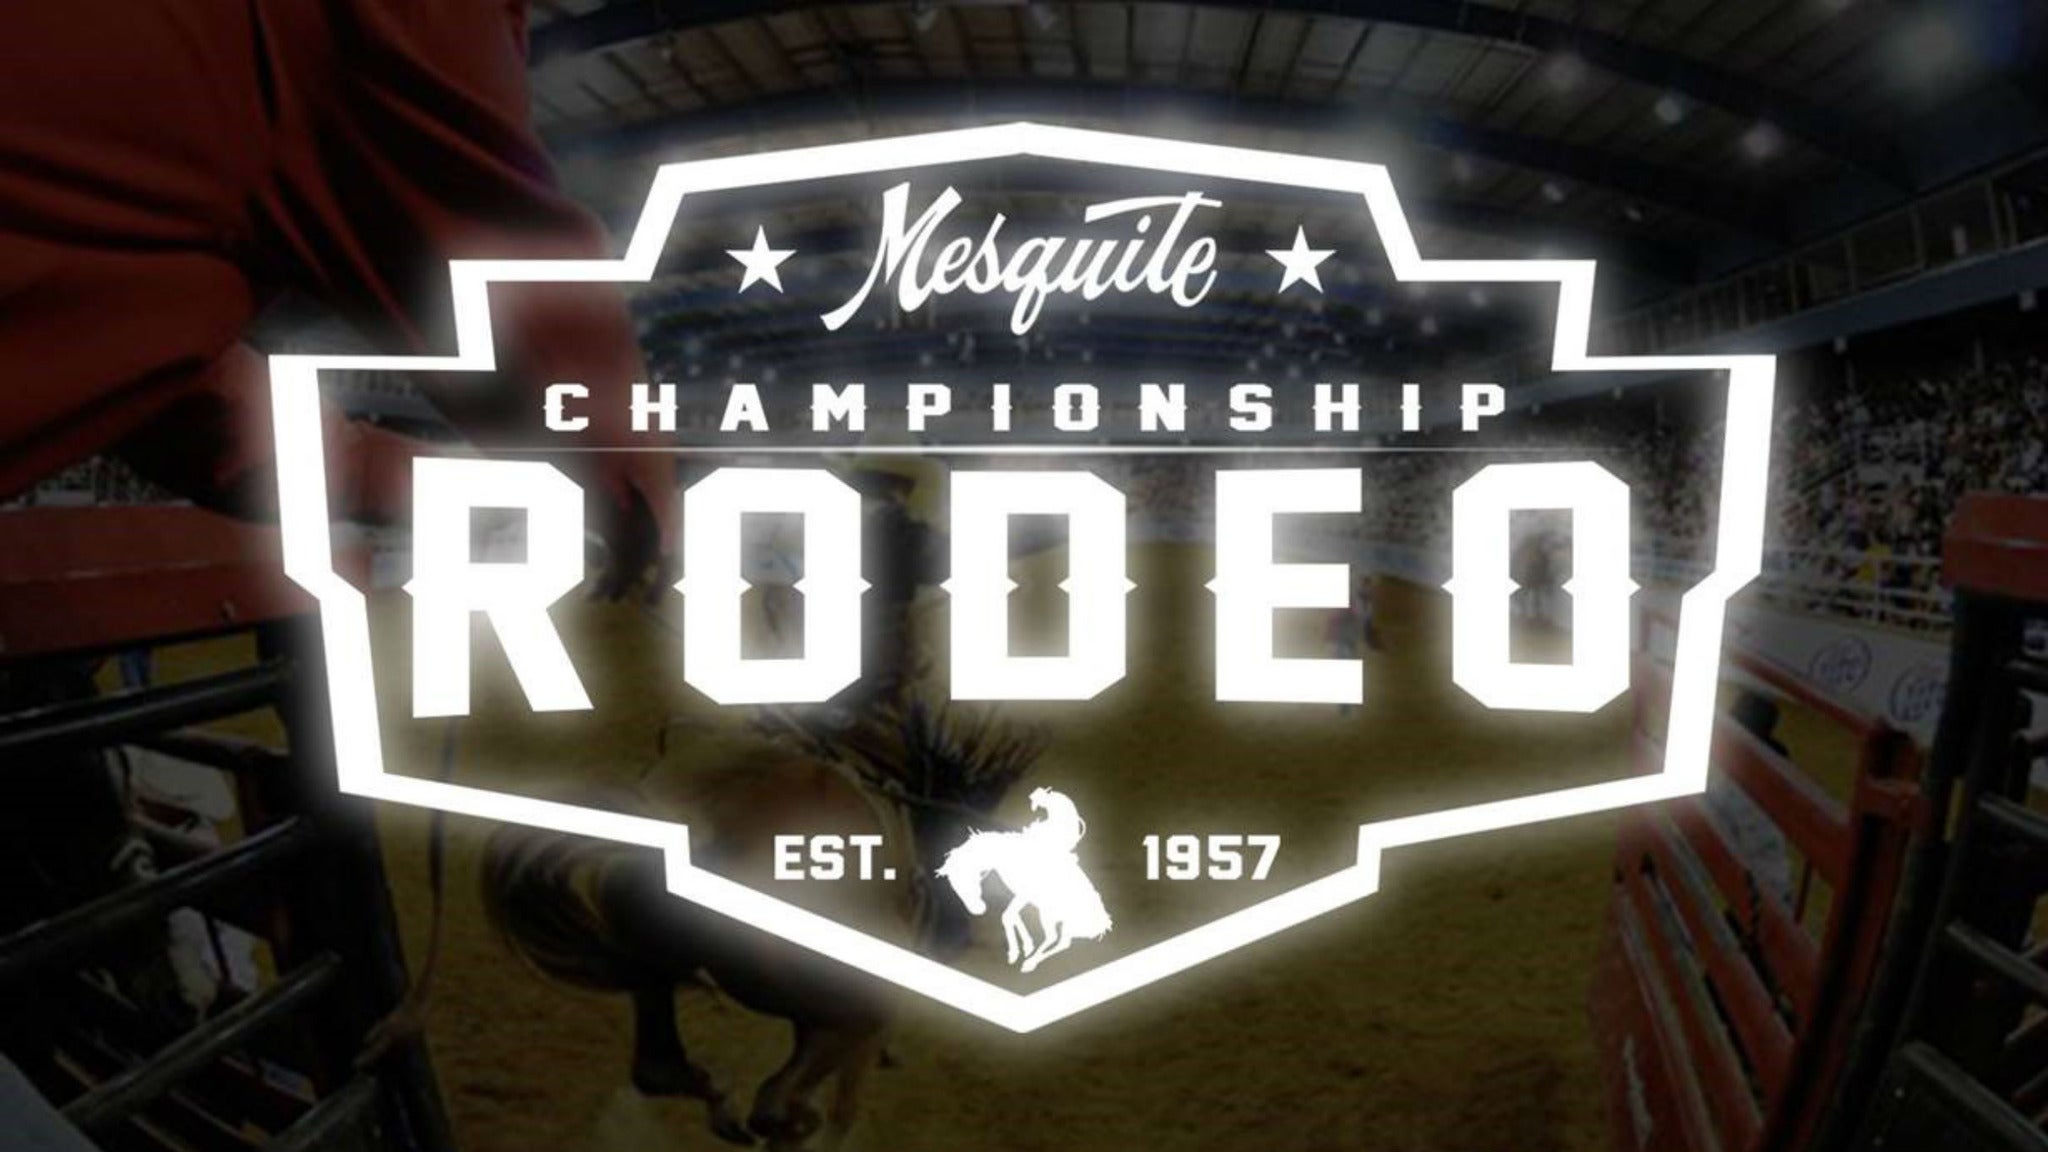 Mesquite Championship Rodeo Tickets | Single Game Tickets & Schedule | Ticketmaster.ca